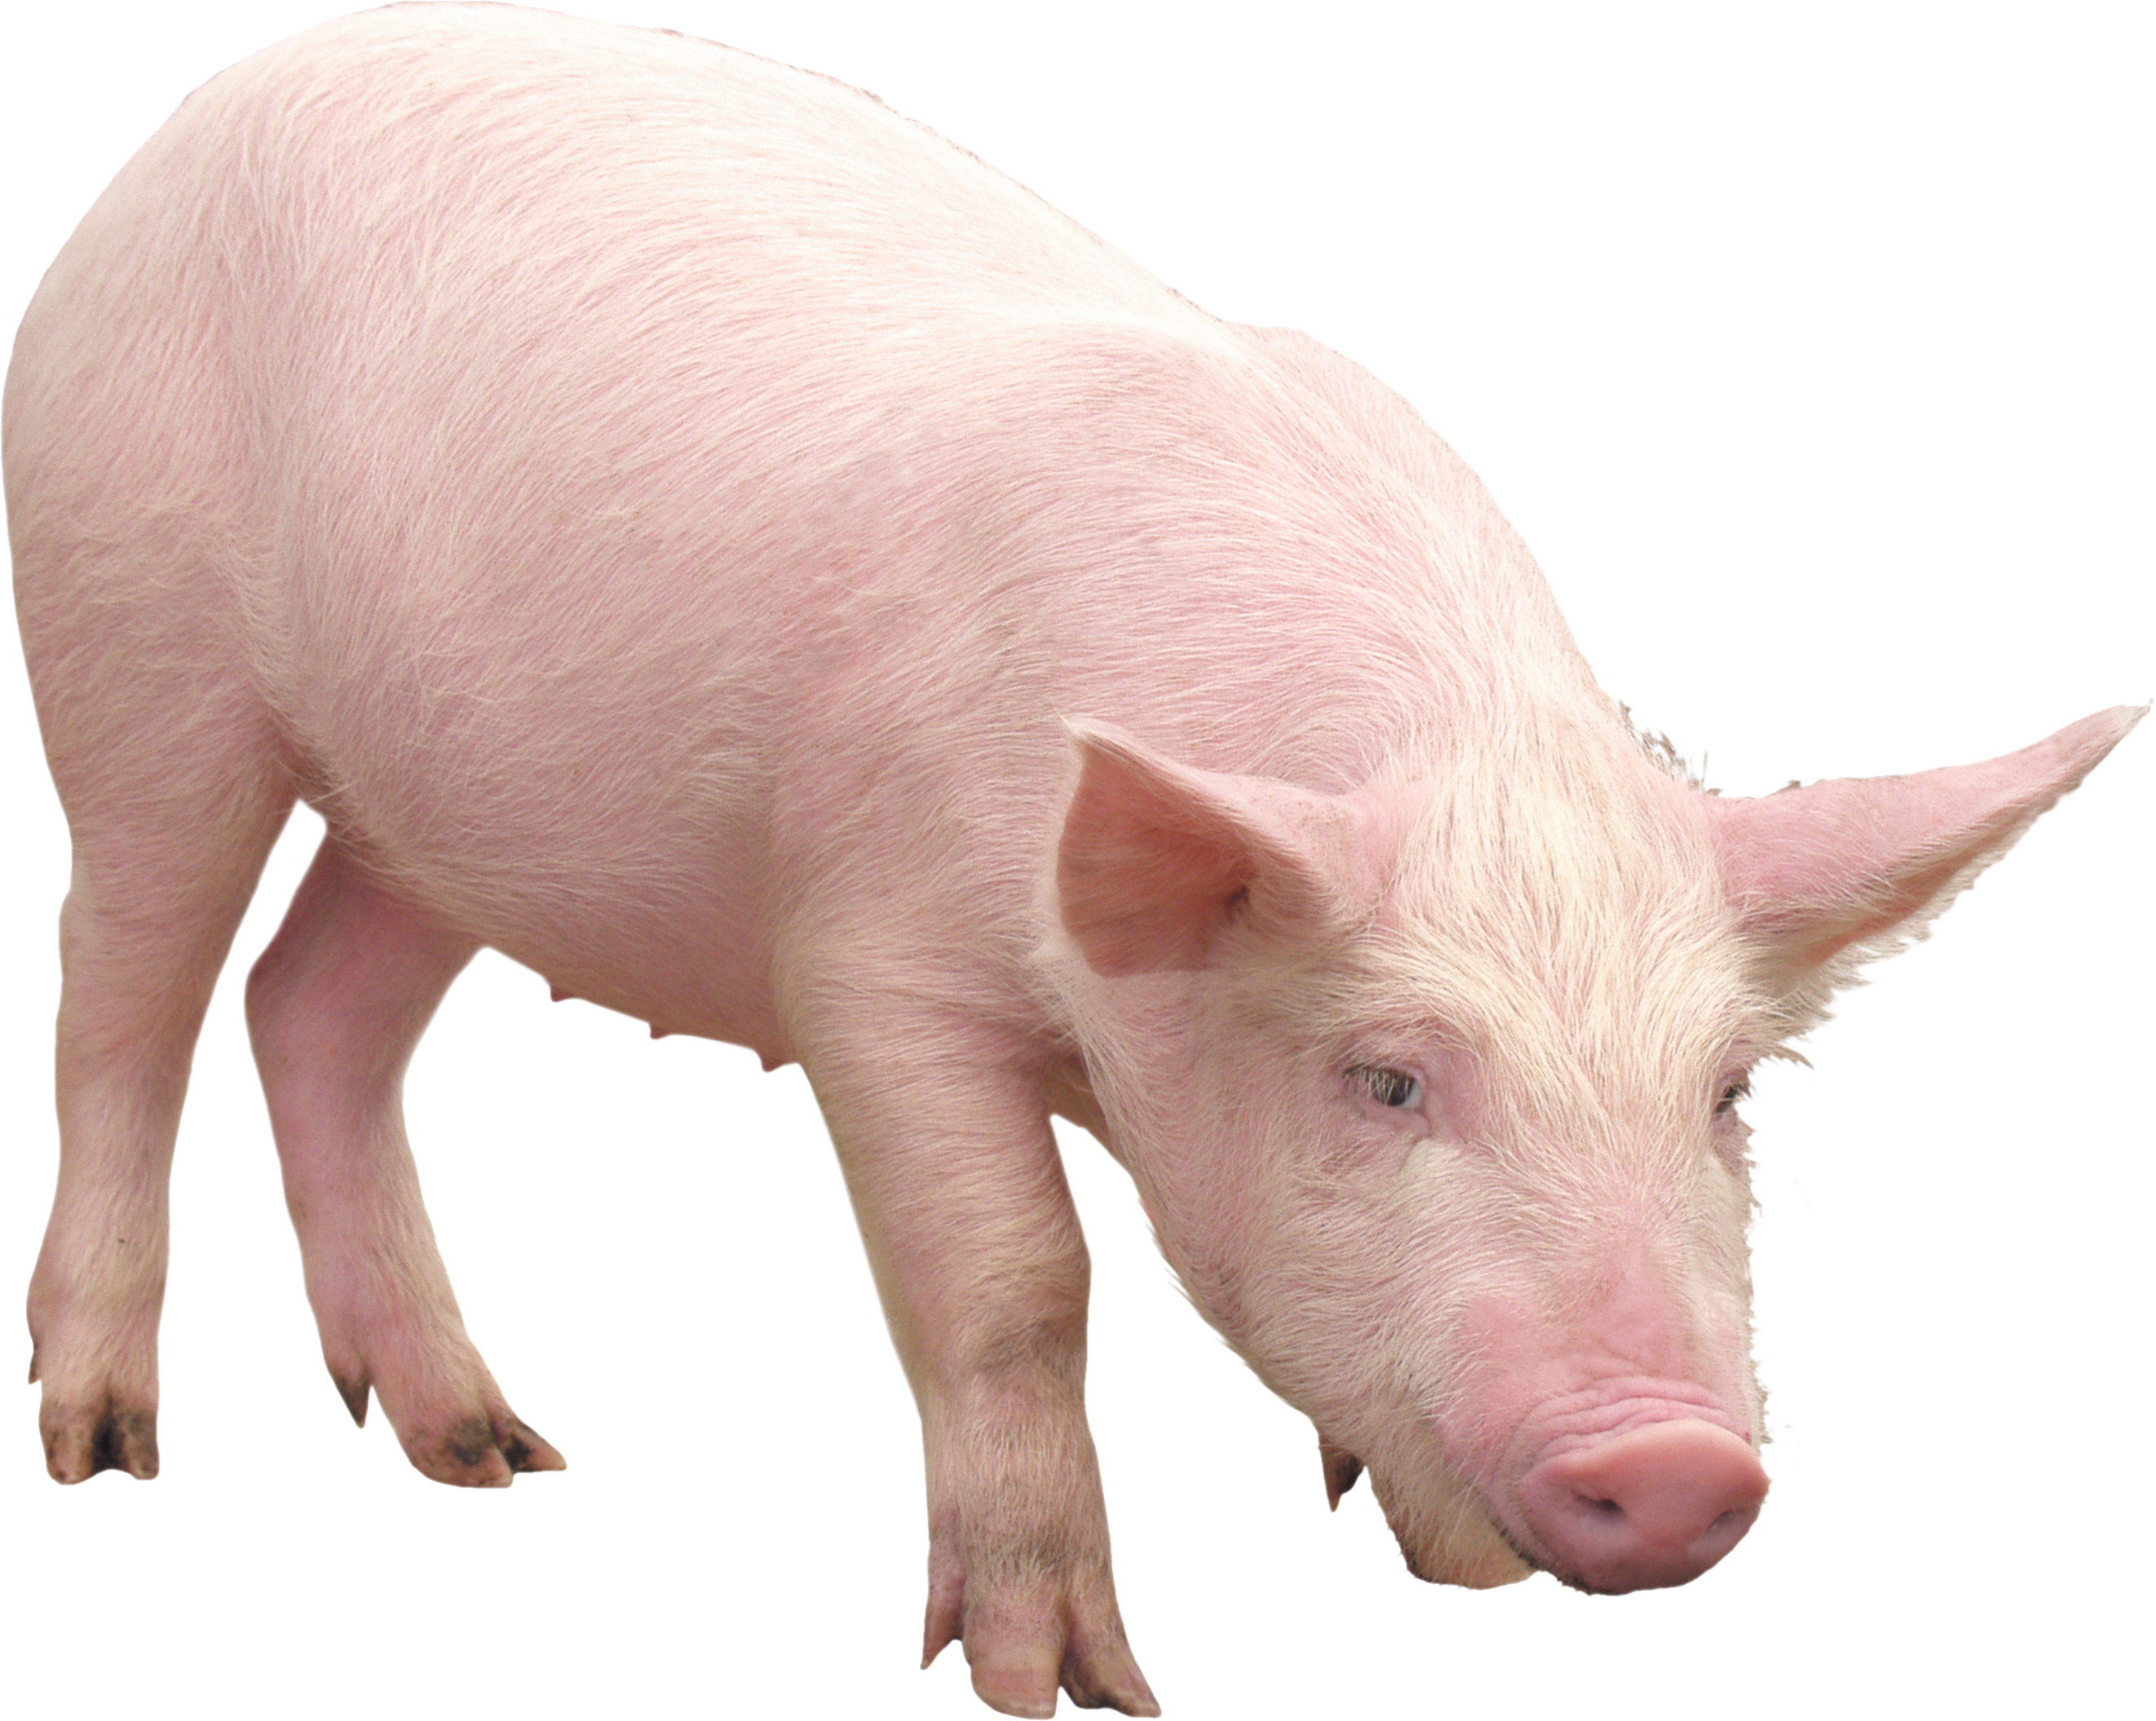 HQ Pig Wallpapers | File 5412.55Kb